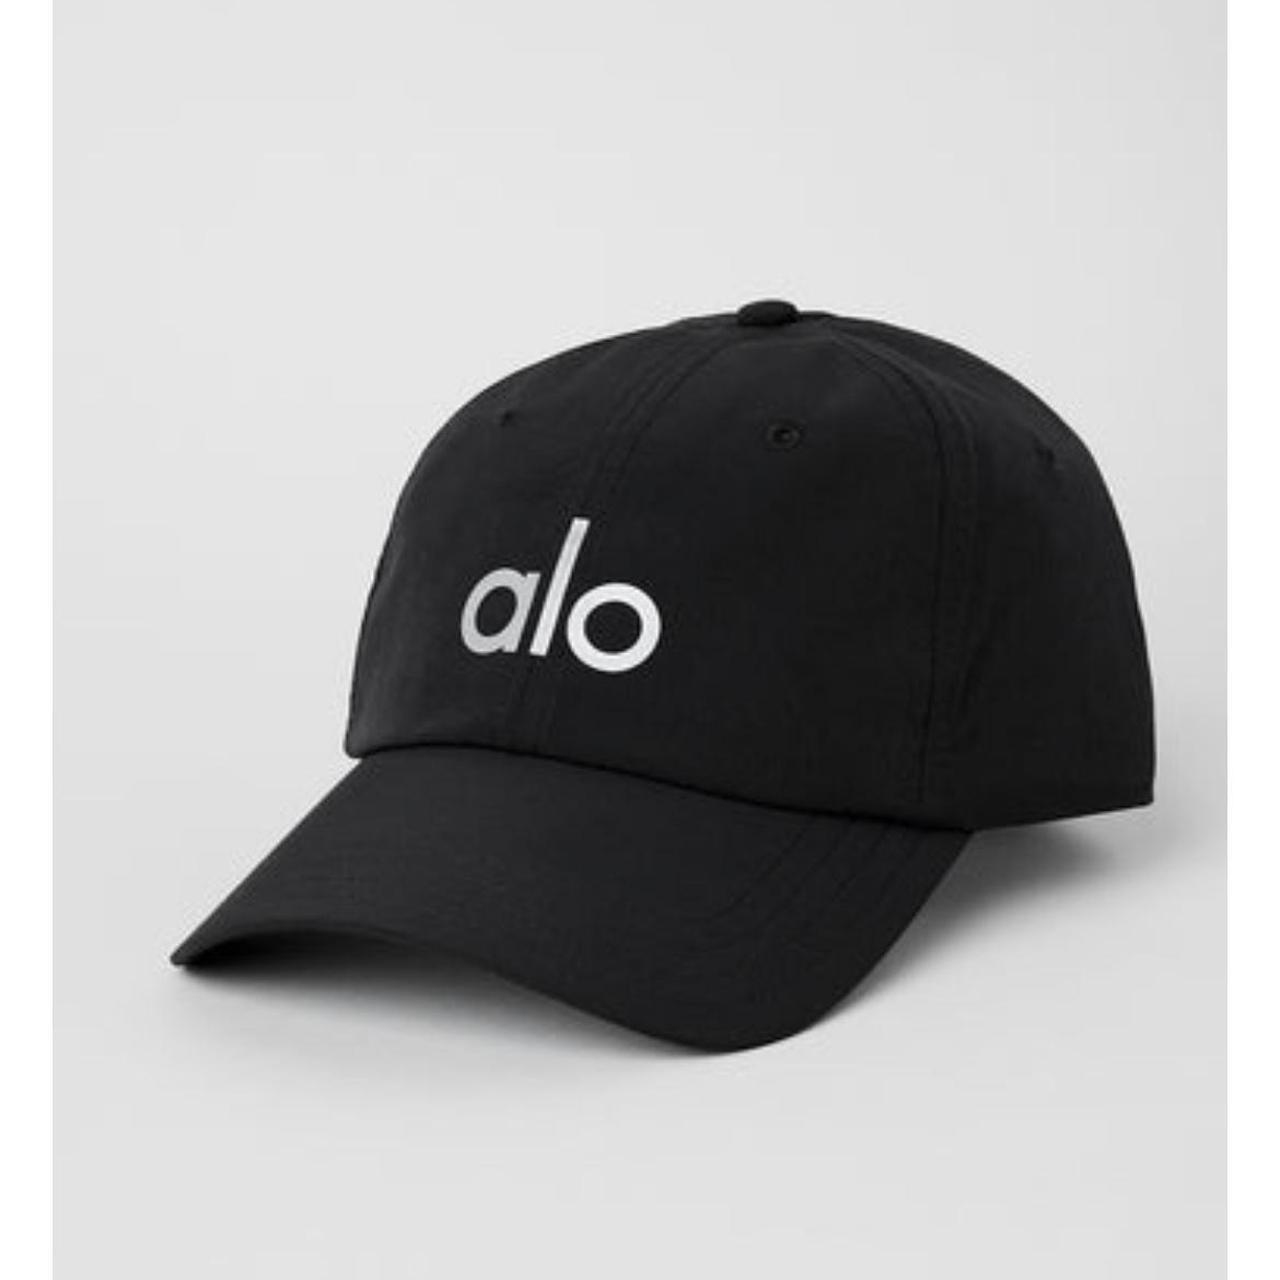 Alo yoga performance off duty cap This is almost... - Depop